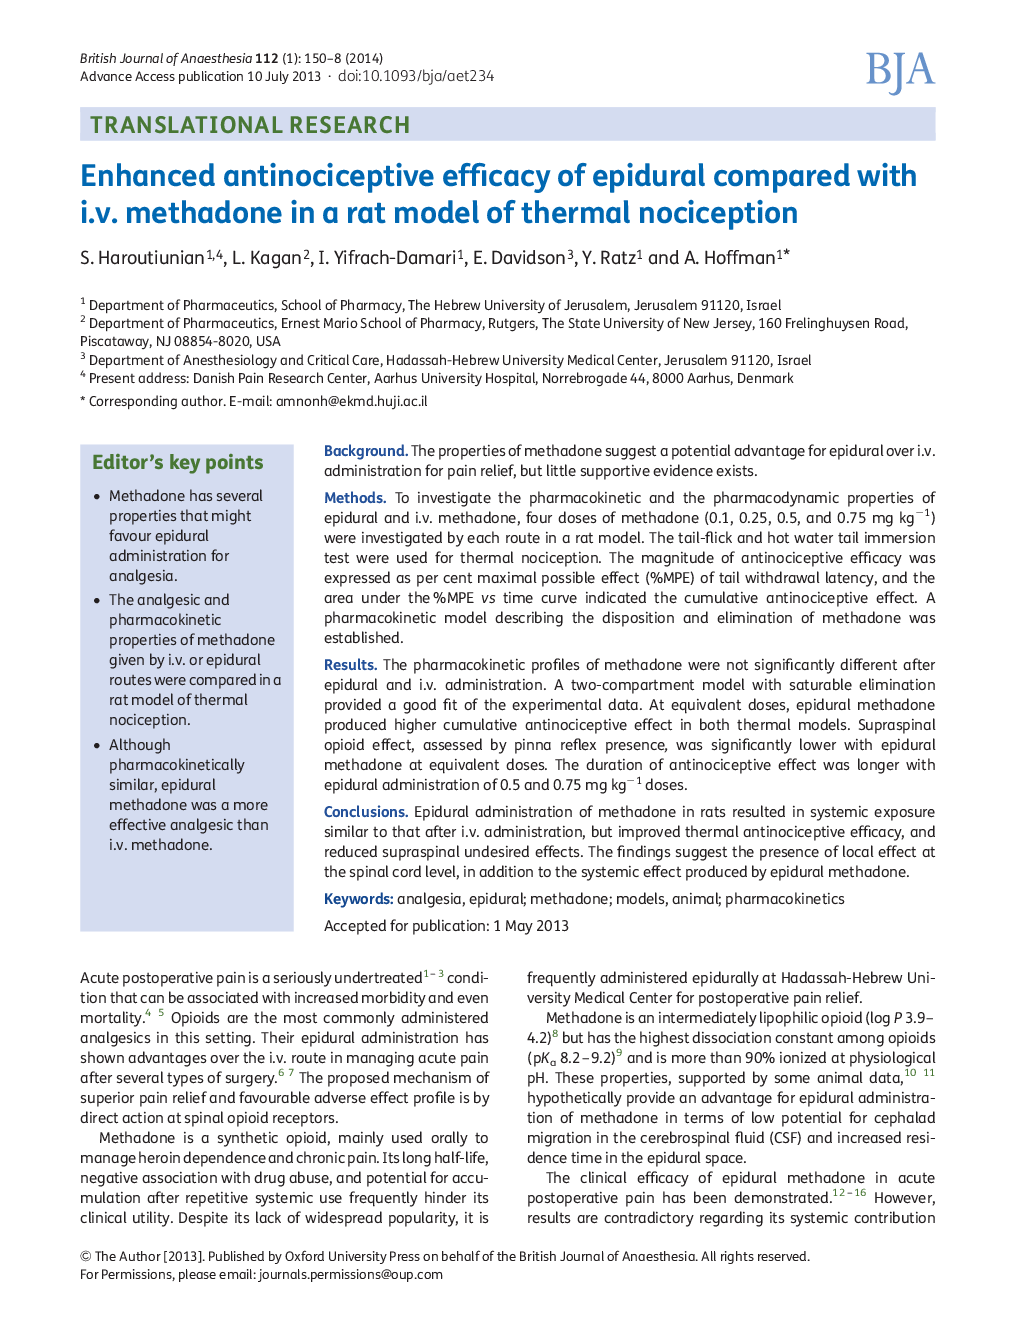 Enhanced antinociceptive efficacy of epidural compared with i.v. methadone in a rat model of thermal nociception